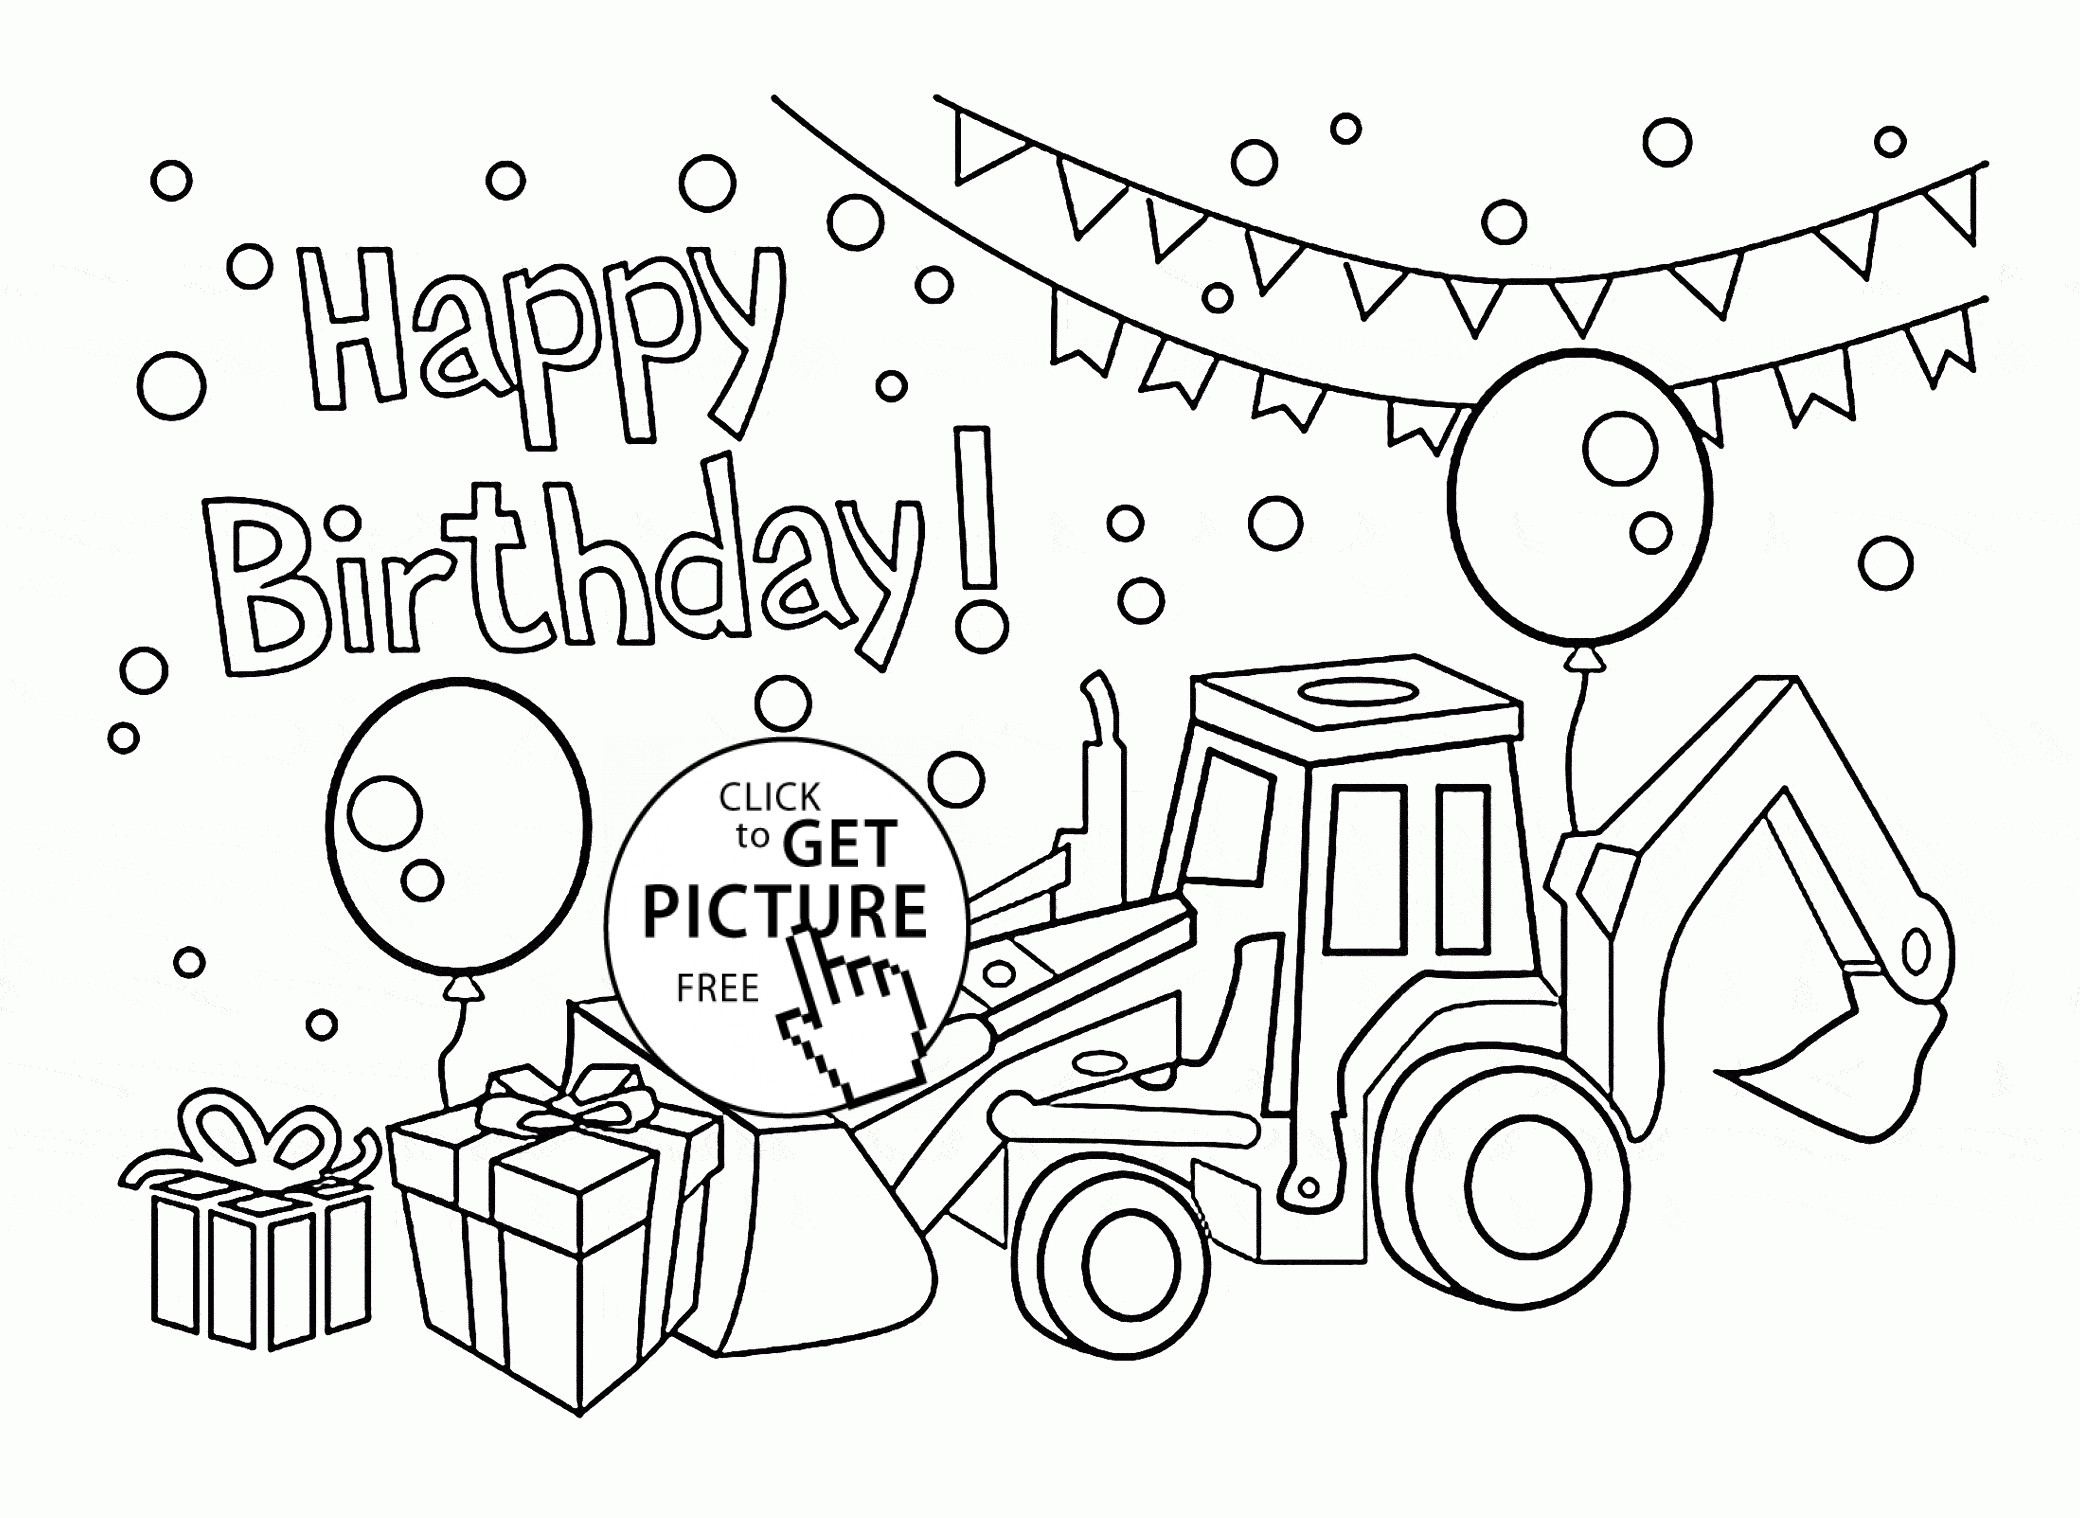 Birthday Cards Coloring Pages Girls
 41 Coloring Pages Cards Valentine Card Coloring Pages 001